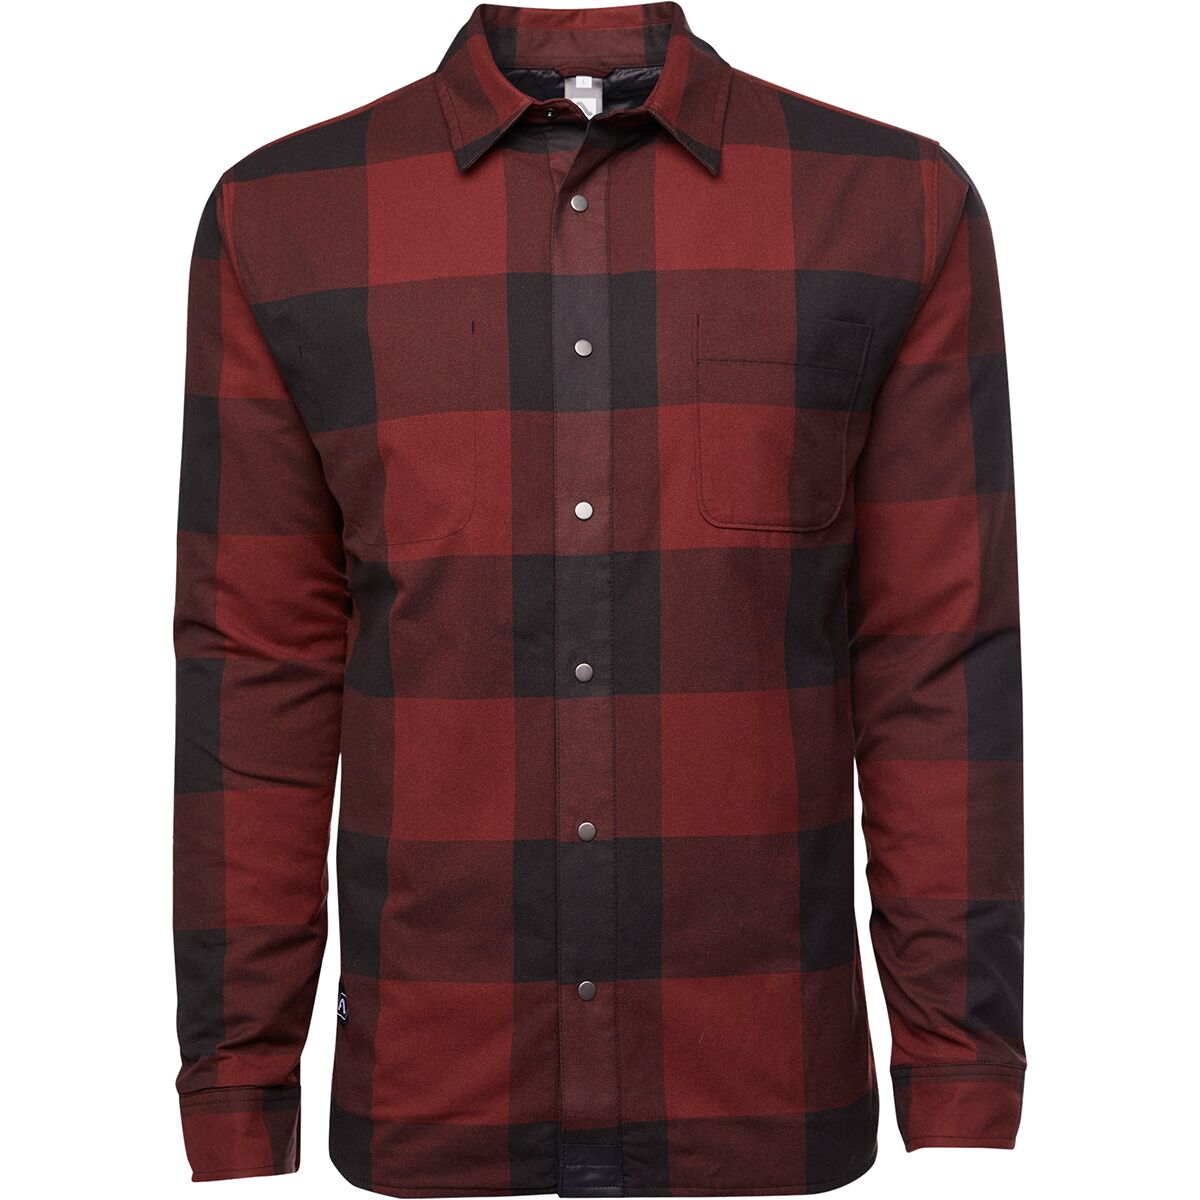 Flylow Sinclair Insulated Flannel Shirt Jacket - Men's - Clothing